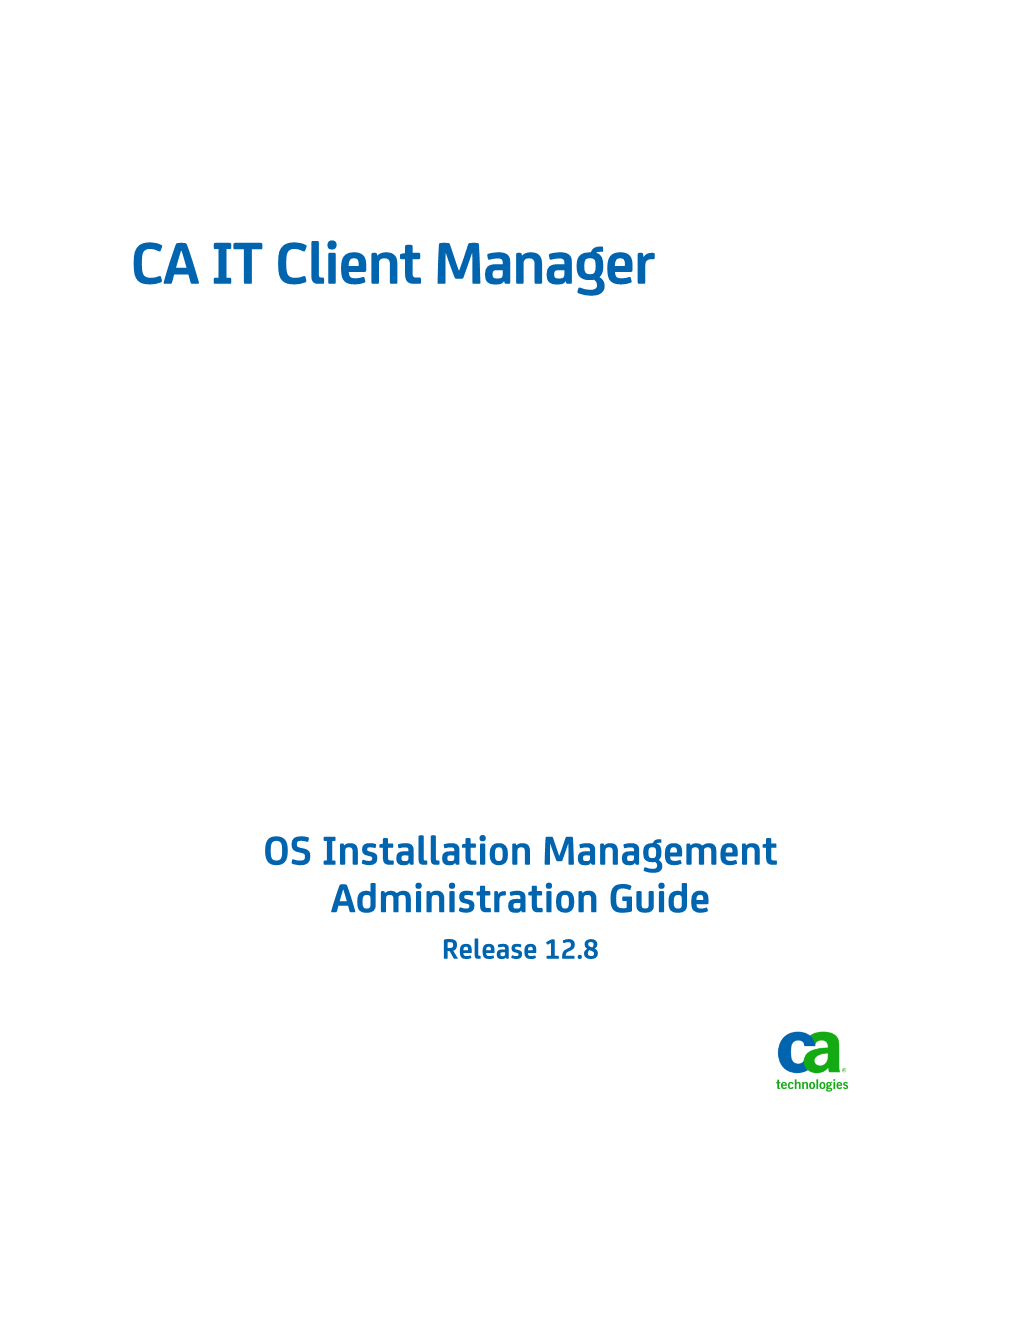 CA IT Client Manager OS Installation Management Administration Guide